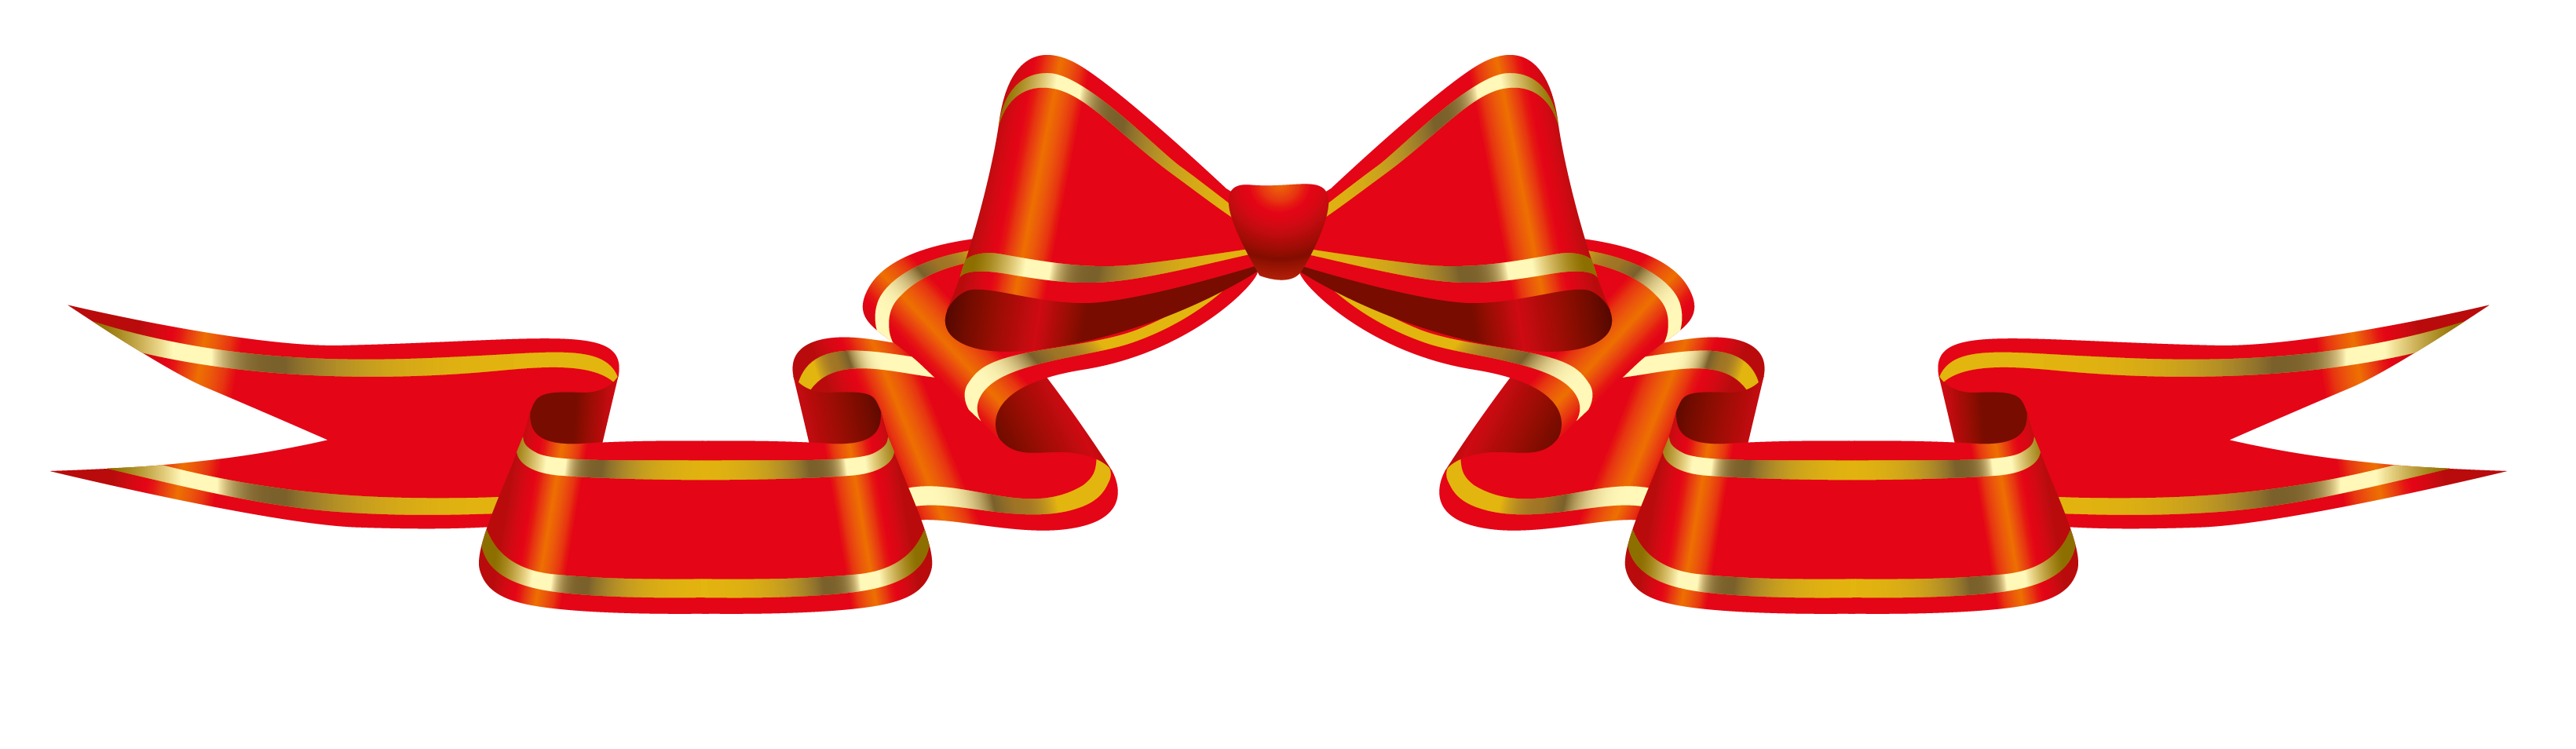 Clipart bow banner. Red with png picture